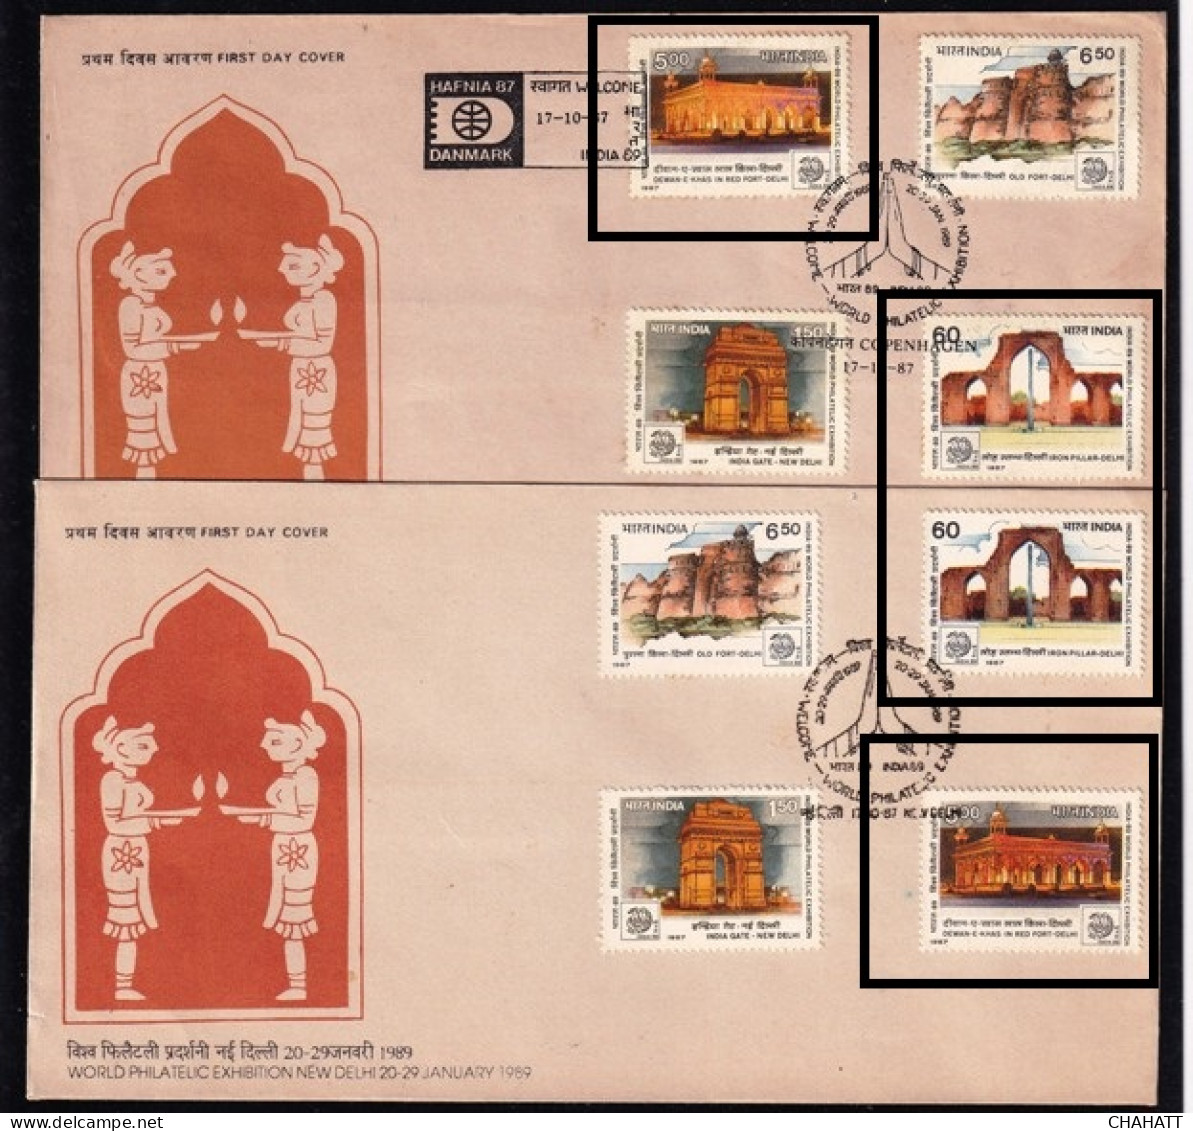 INDIA-1987-HERITAGE MONUMENTS- SET OF FDCs -CANCELLED IN INDIA AND DENMARK- ERROR- COLOR VARIETIES-BX4-17 - Varietà & Curiosità